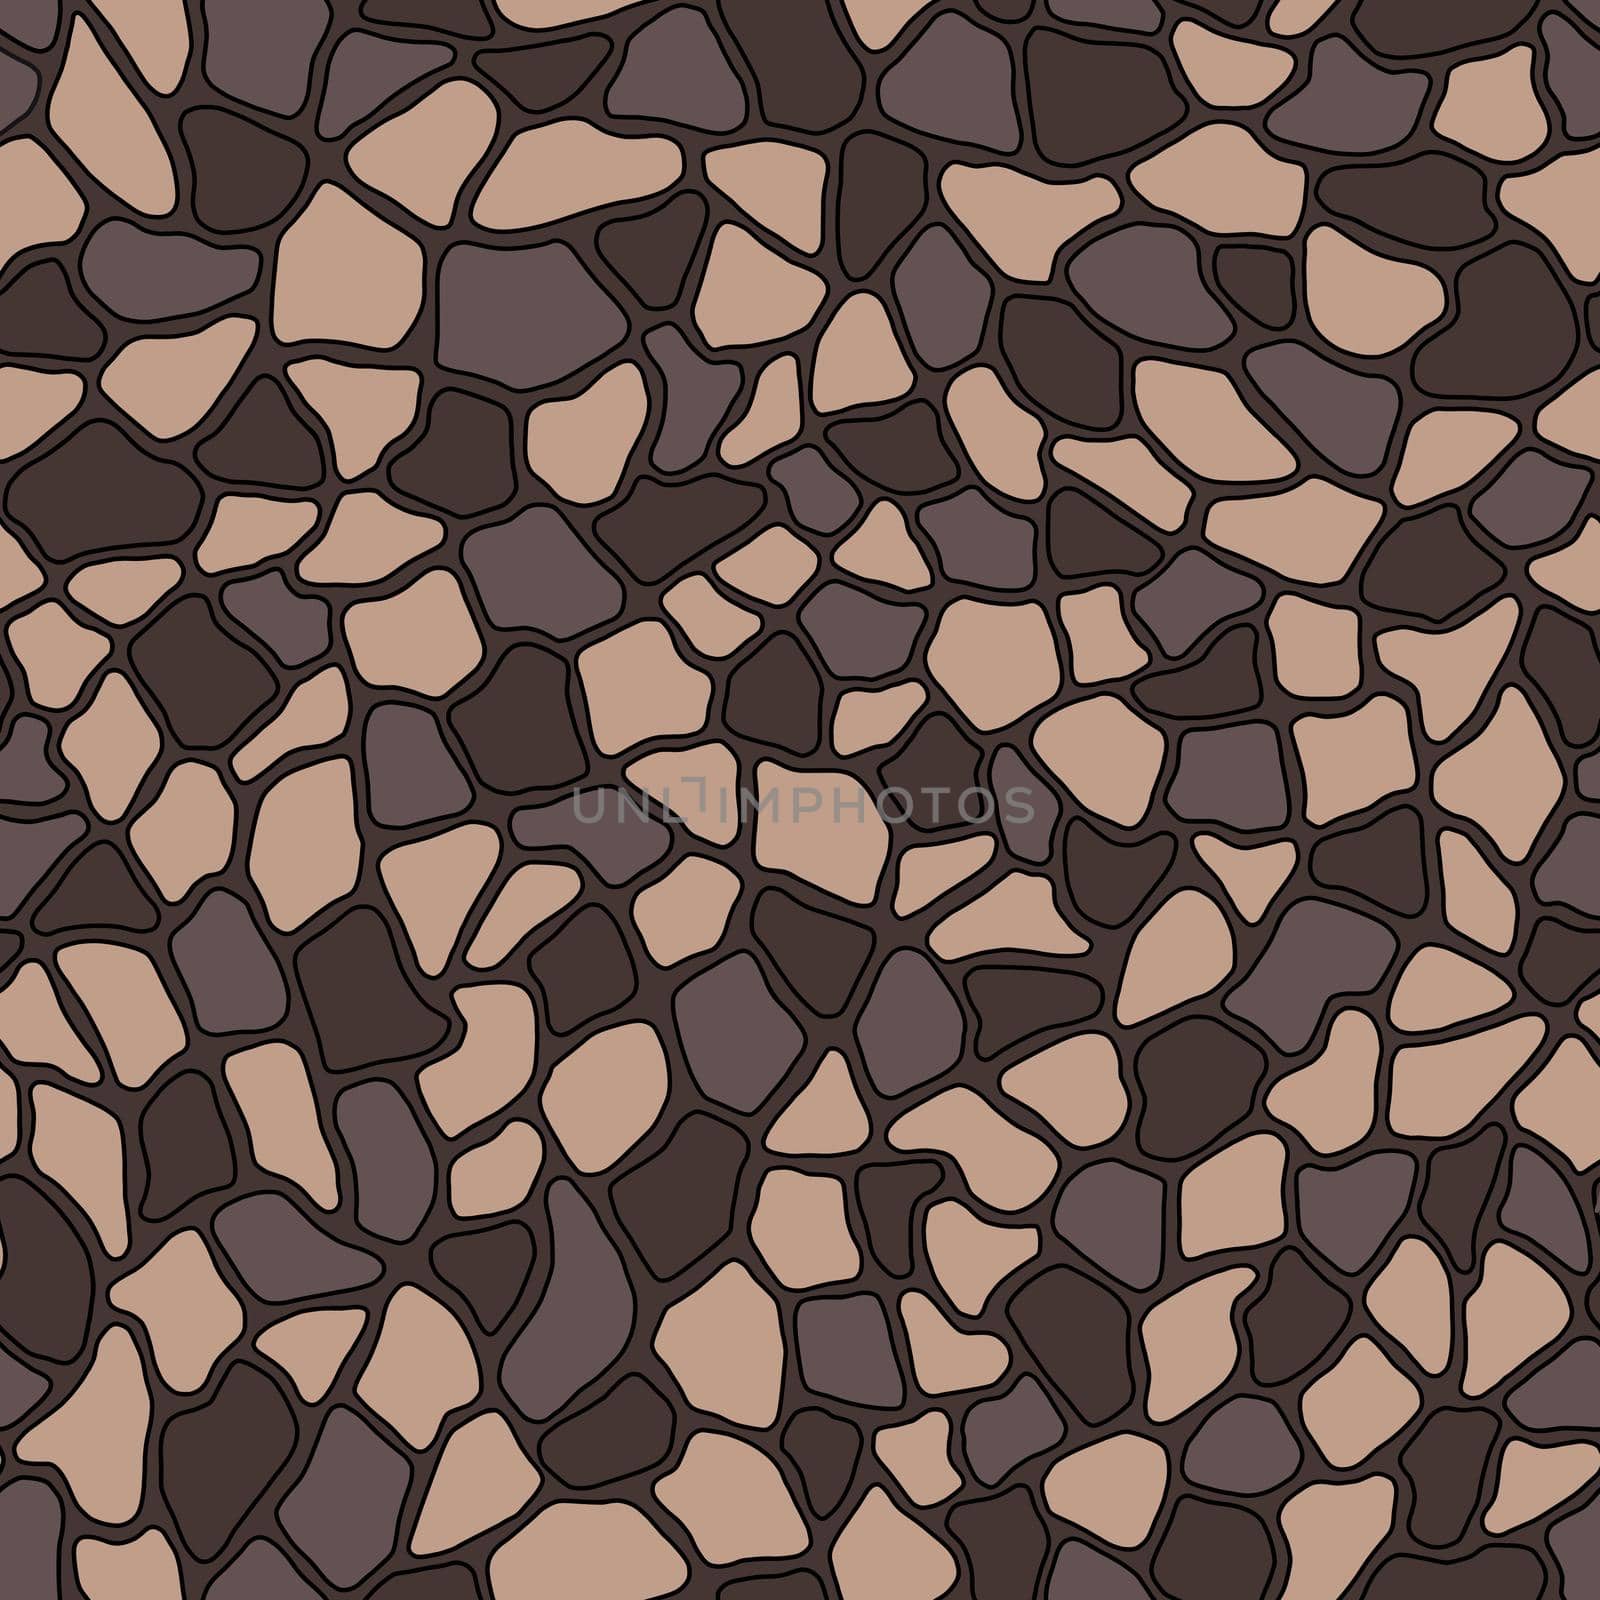 Terrazzo modern trendy colorful seamless pattern.Abstract creative backdrop with chaotic small pieces irregular shapes. Ideal for wrapping paper,textile,print,wallpaper,terrazzo flooring.Brown, beige by Angelsmoon